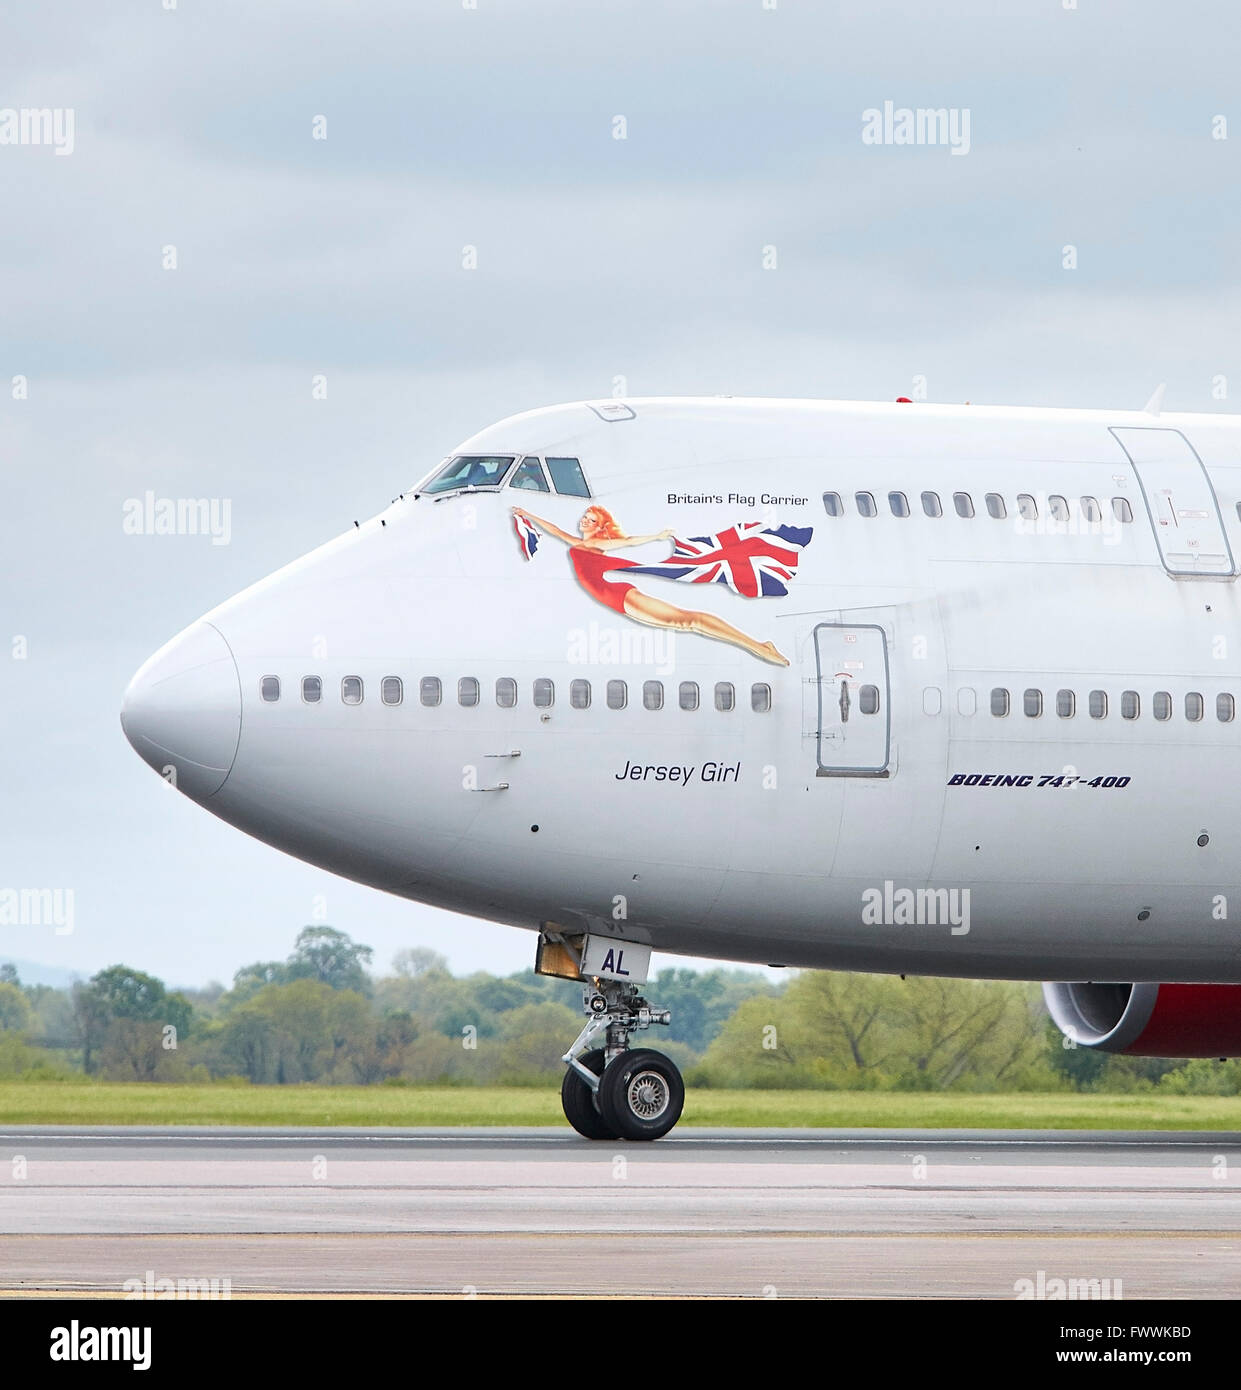 Detail of Britain's Flag Carrier 'Jersey Girl'. Manchester Airport, Manchester, United Kingdom. Architect: n/a, 2015. Stock Photo